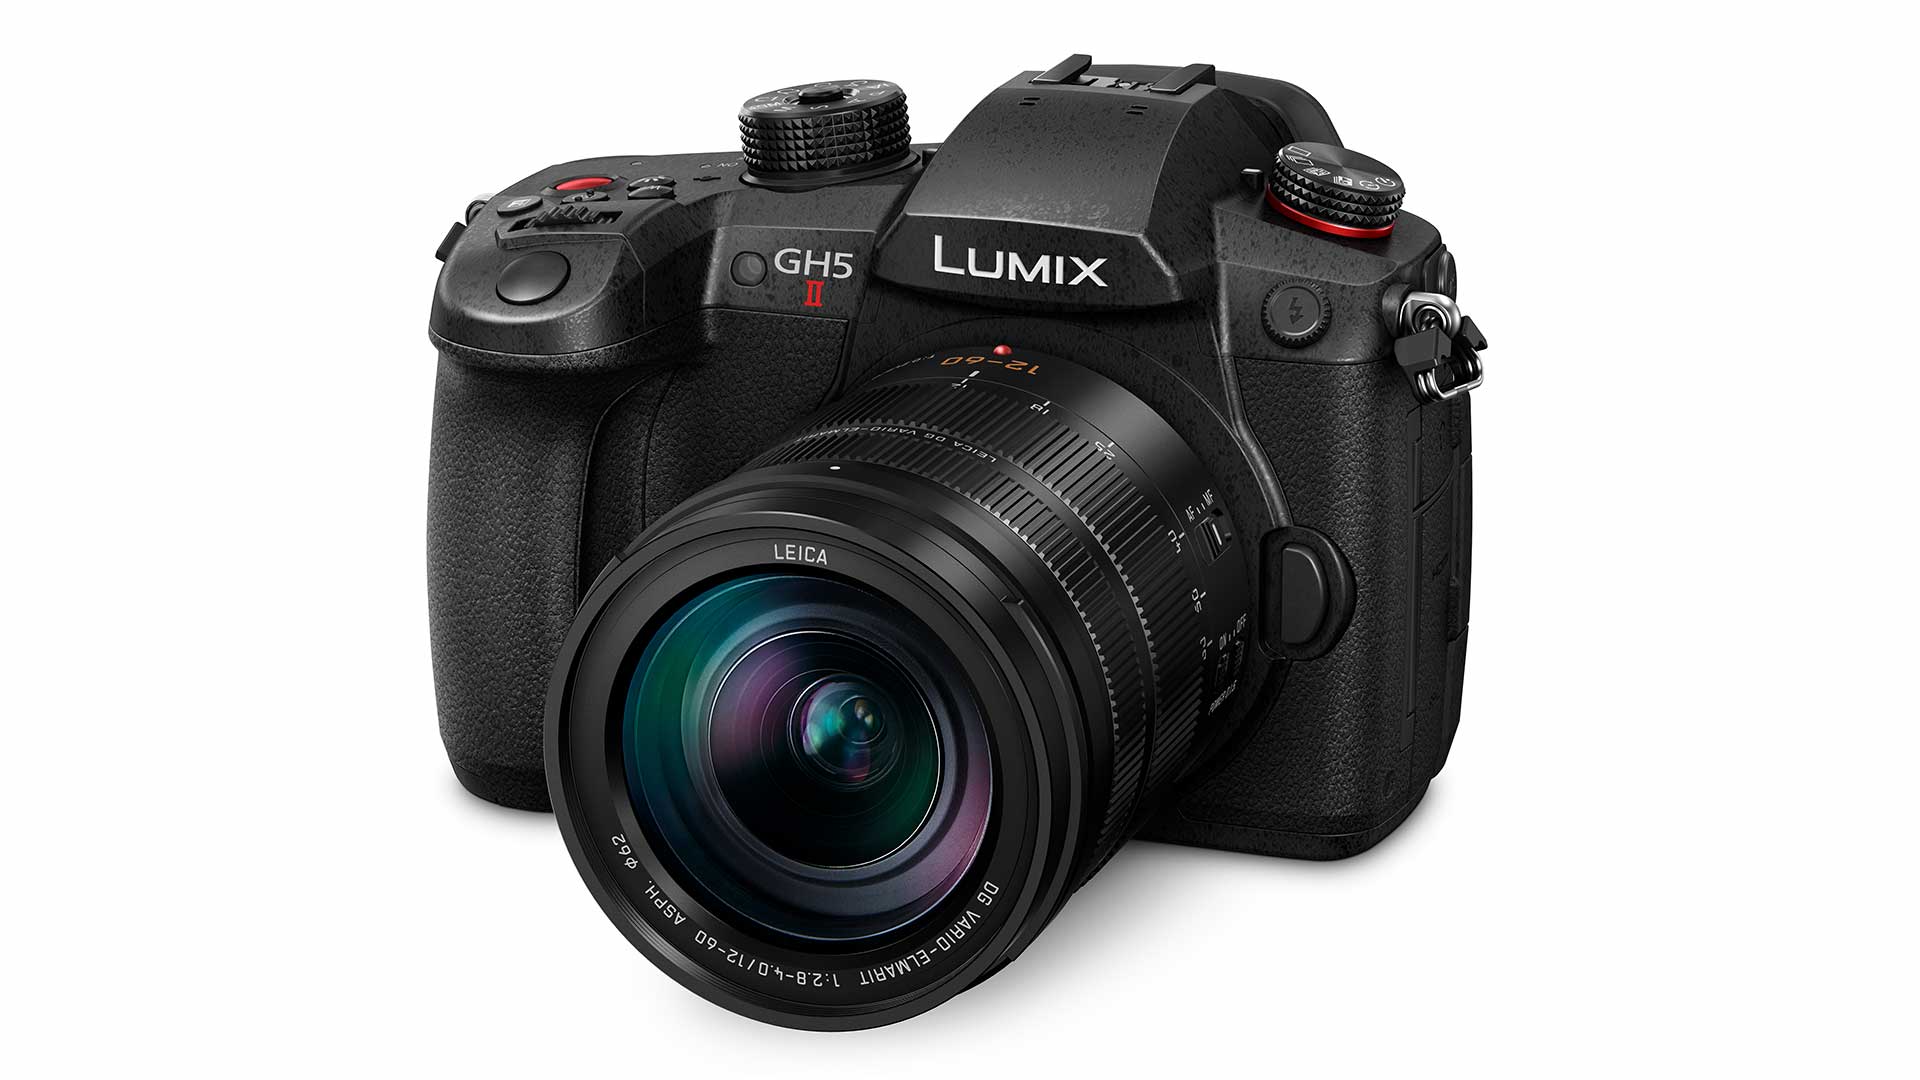 The LUMIX GH5M2 is here! Image: Panasonic.